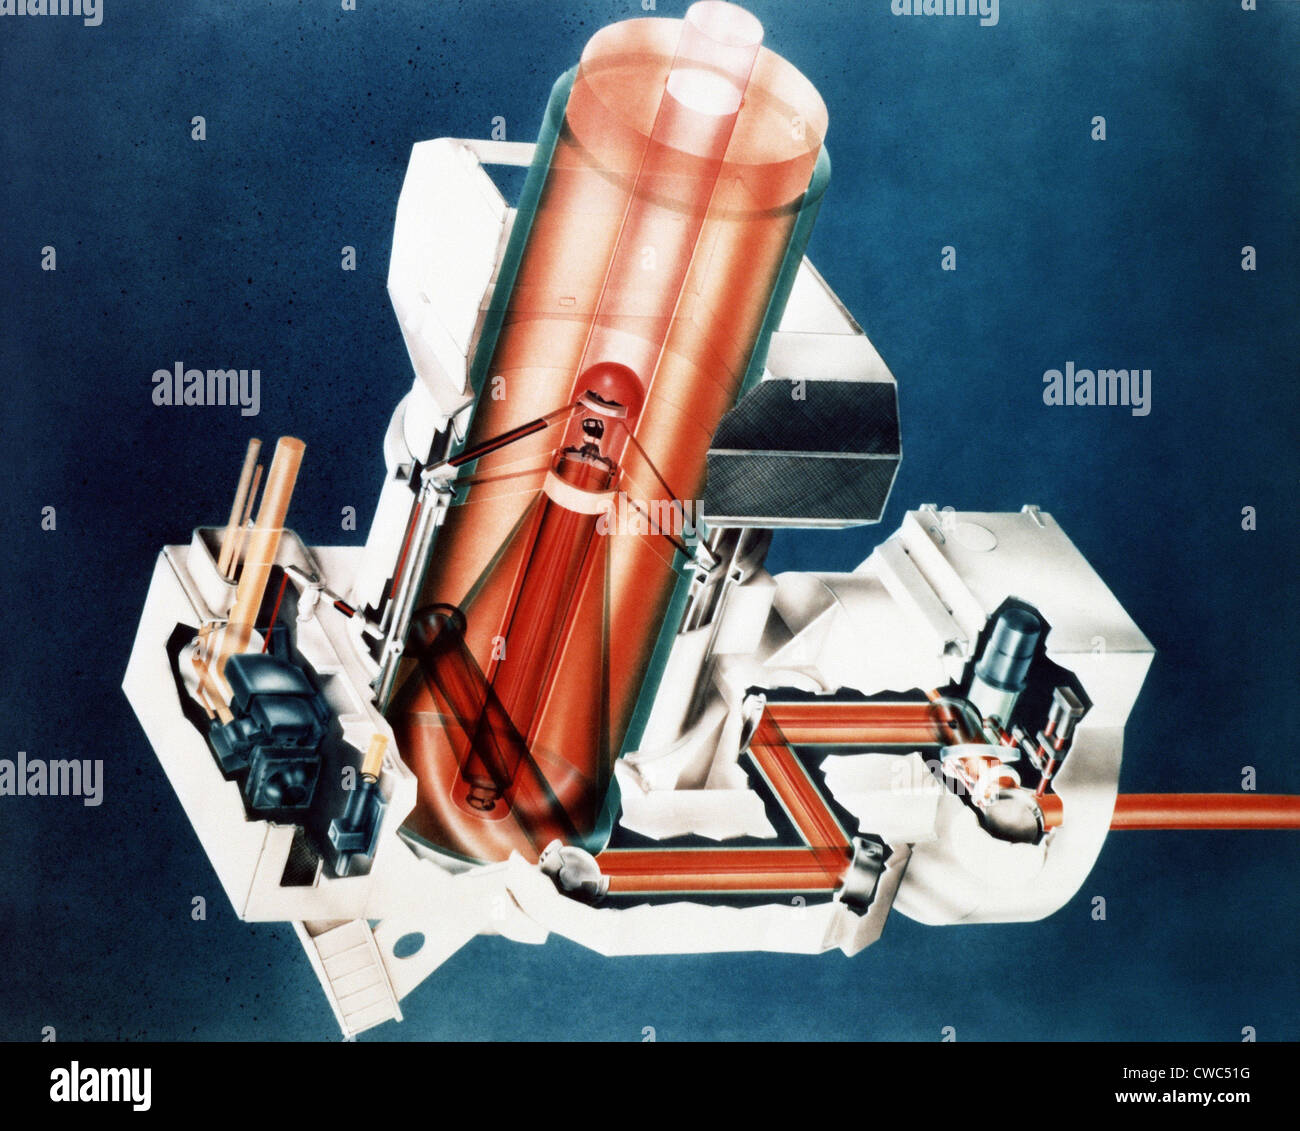 1985 military artist's concept of a laser beam director with the cutaway showing laser paths designed to track targets in Stock Photo